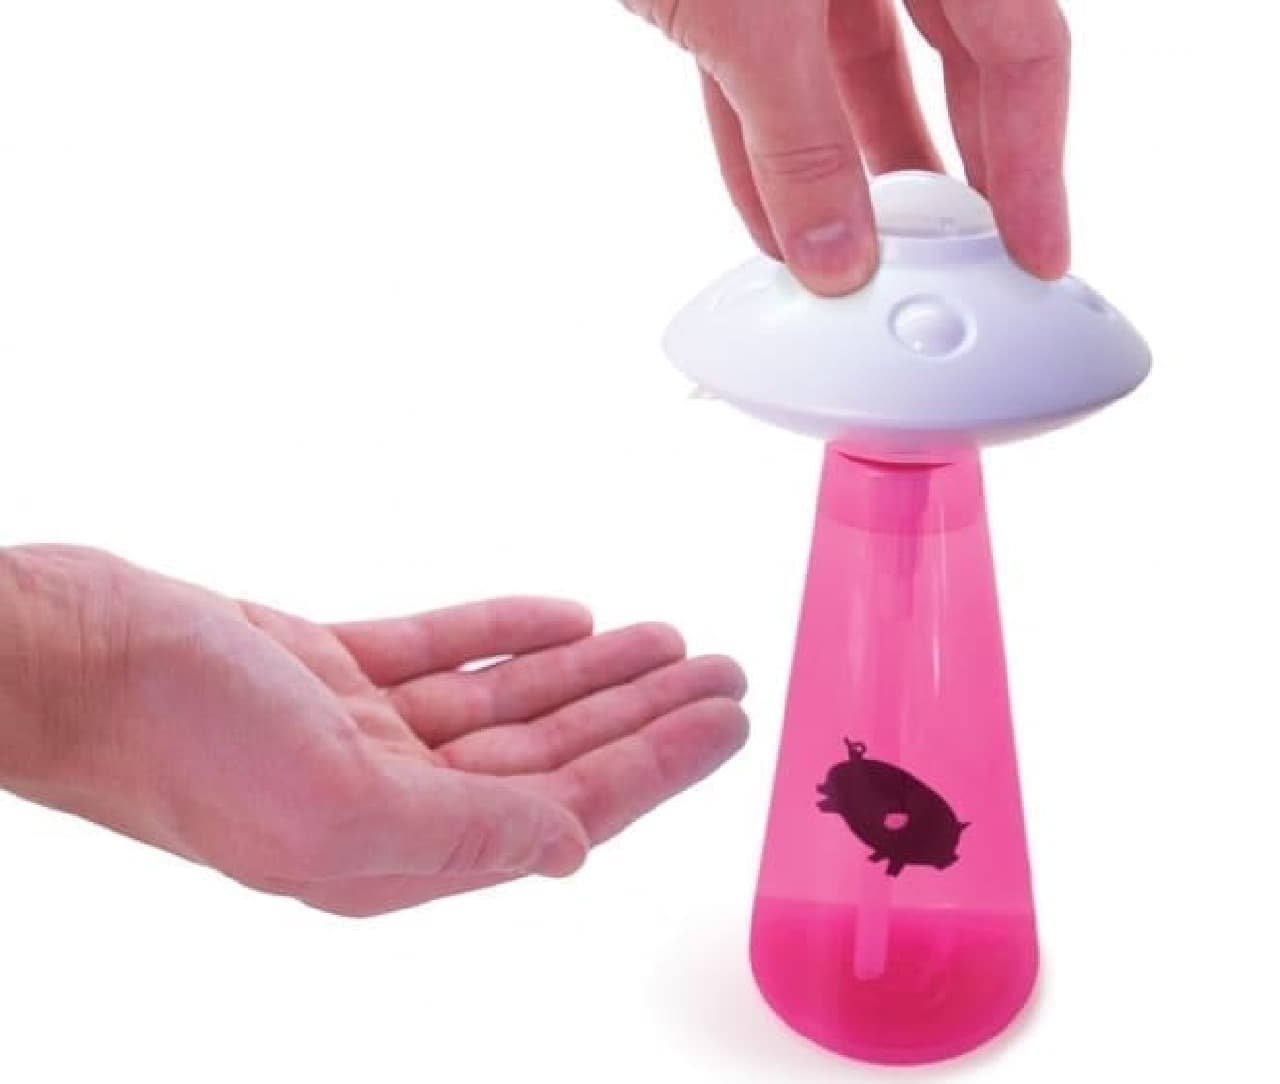 How to use soap dispenser "UFO soap pump"